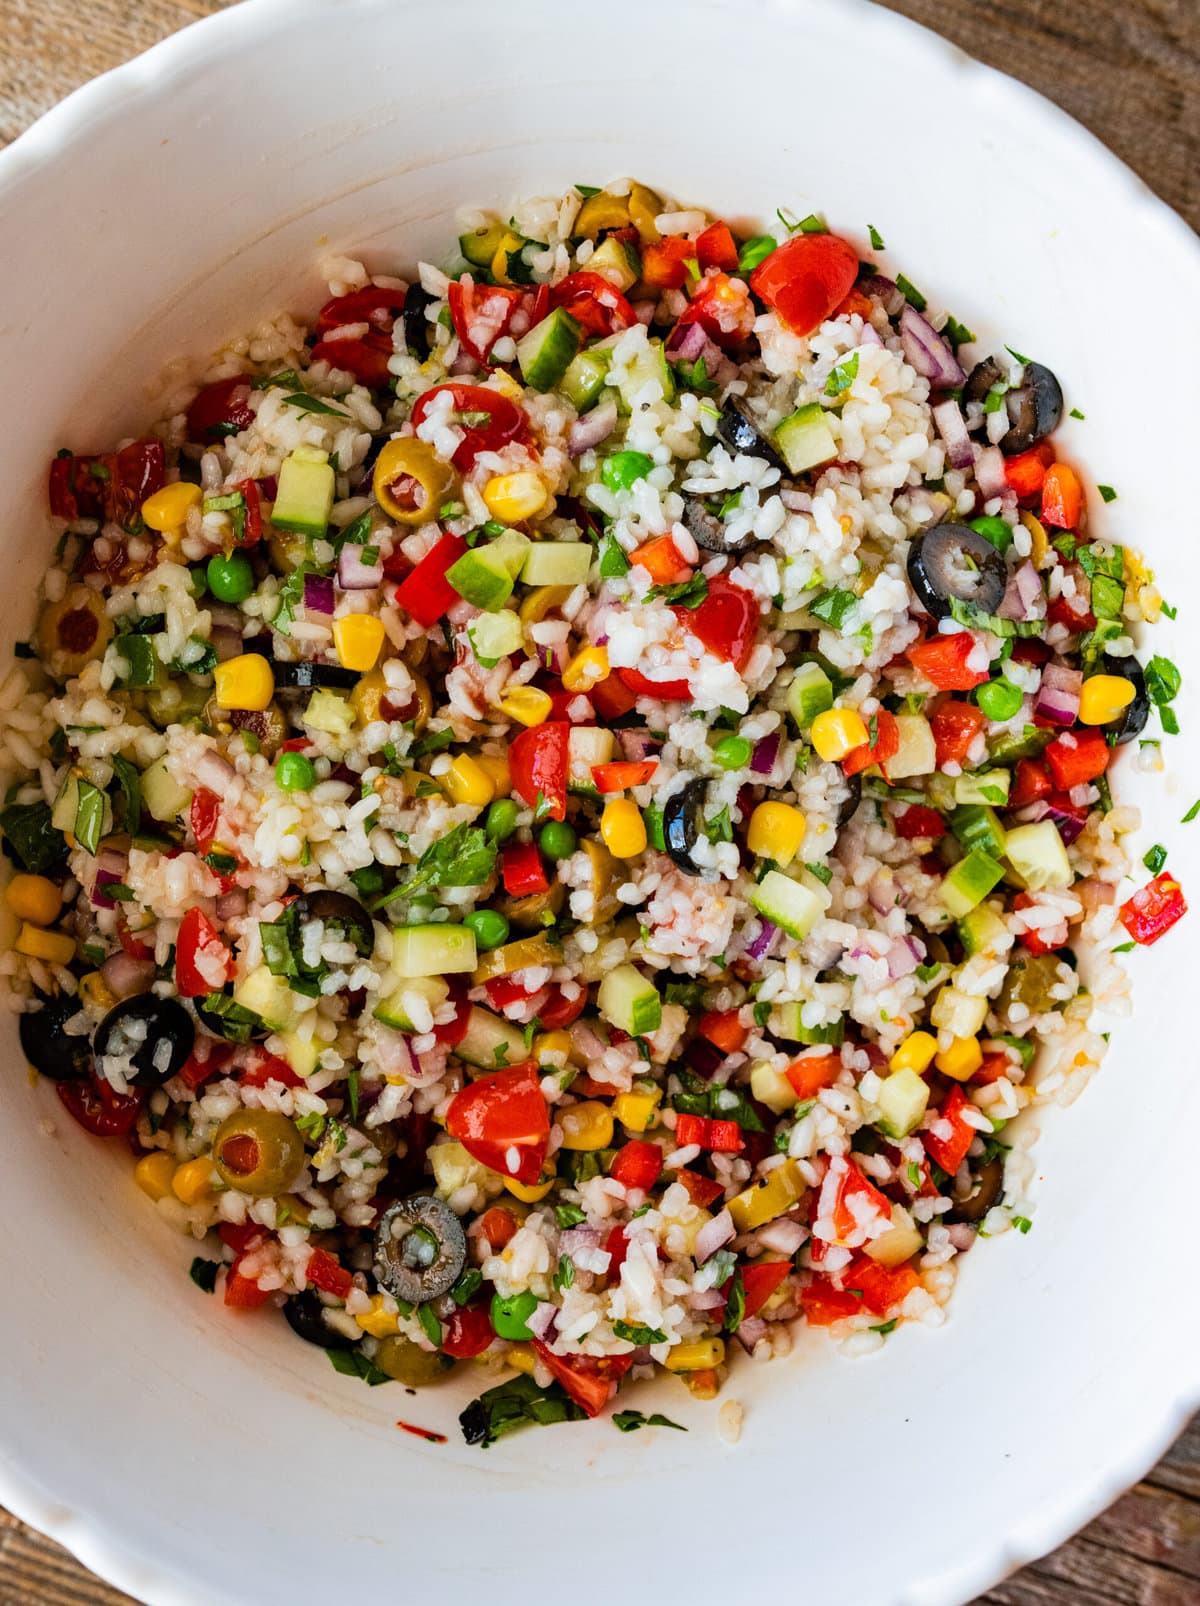 How to Make- Italian Rice Salad Recipe (Insalata Di Riso)- all the ingredients mixed in the bowl and salad ready to serve.